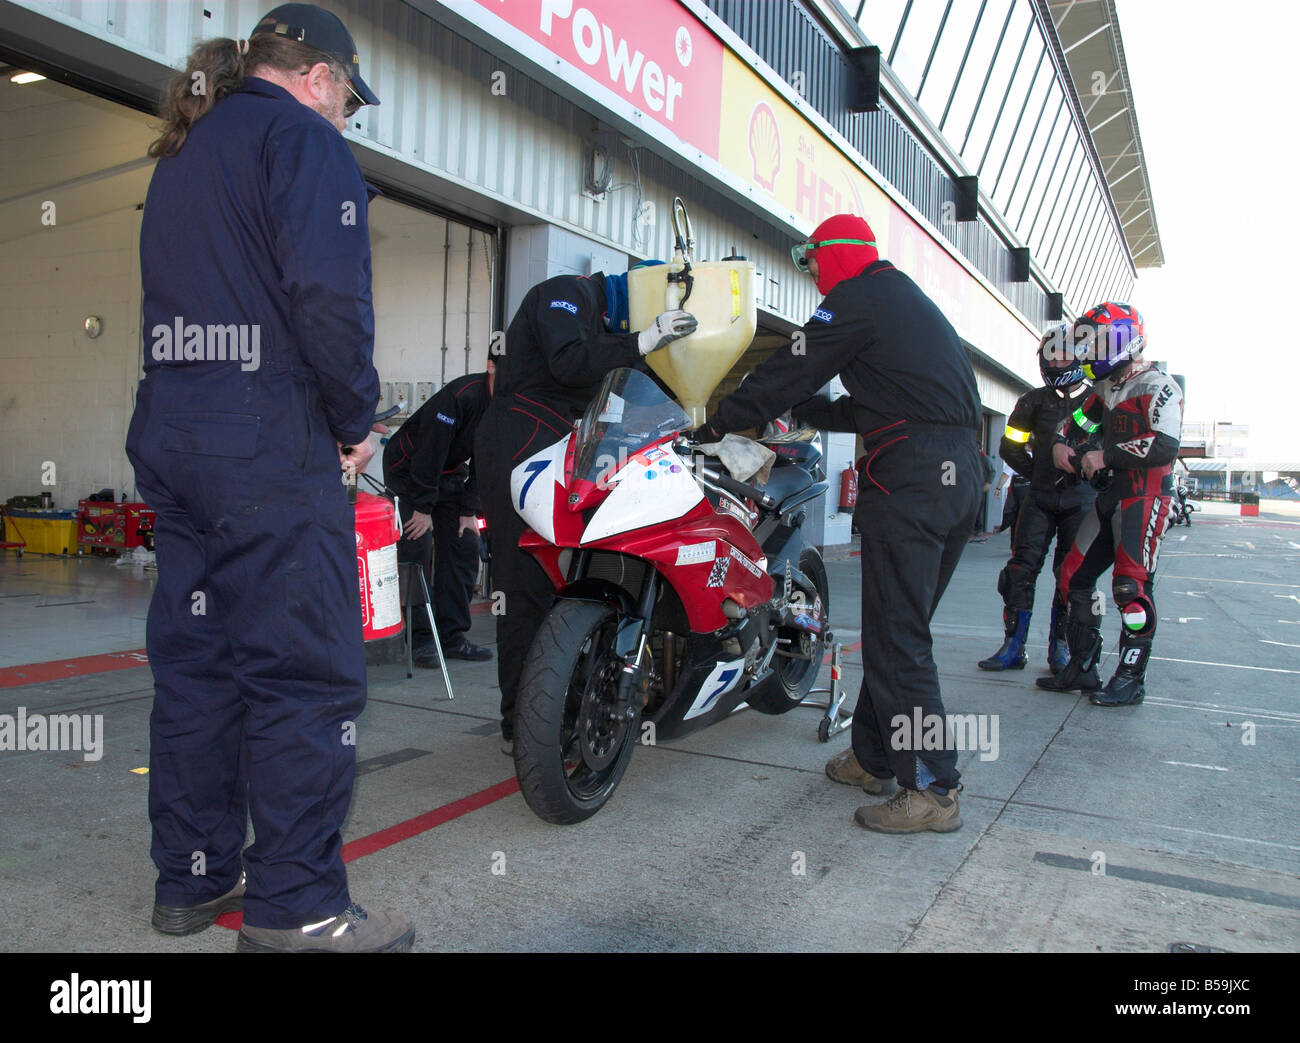 Pit Stop During A British Endurance Motorcycle Race Stock Photo